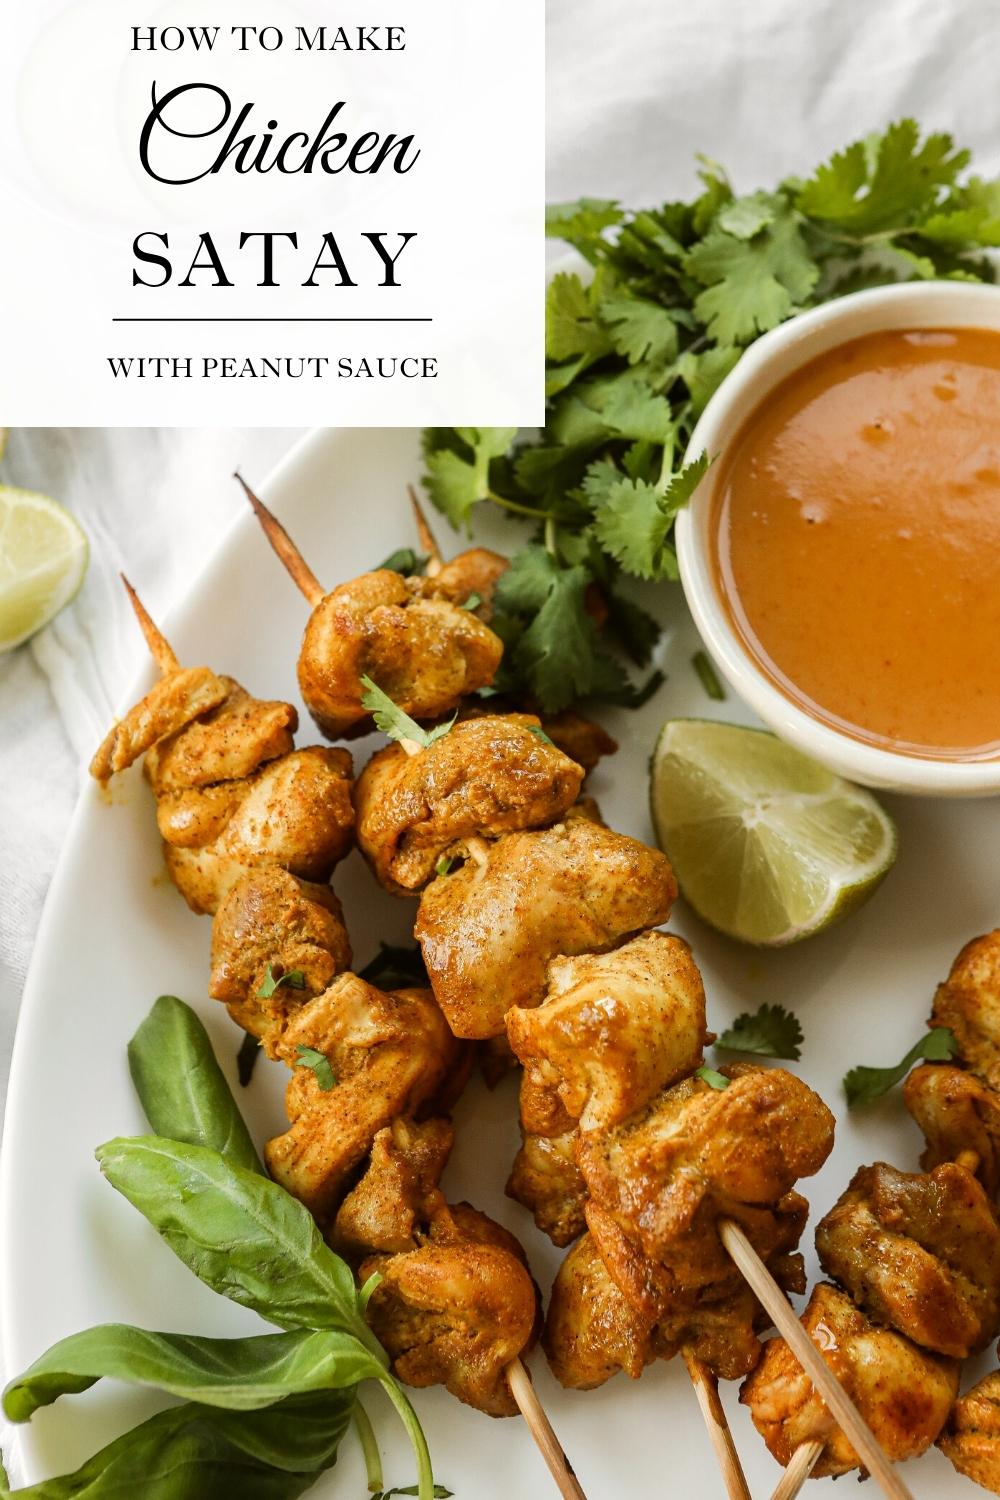 Recipe for Chicken Satay with peanut sauce